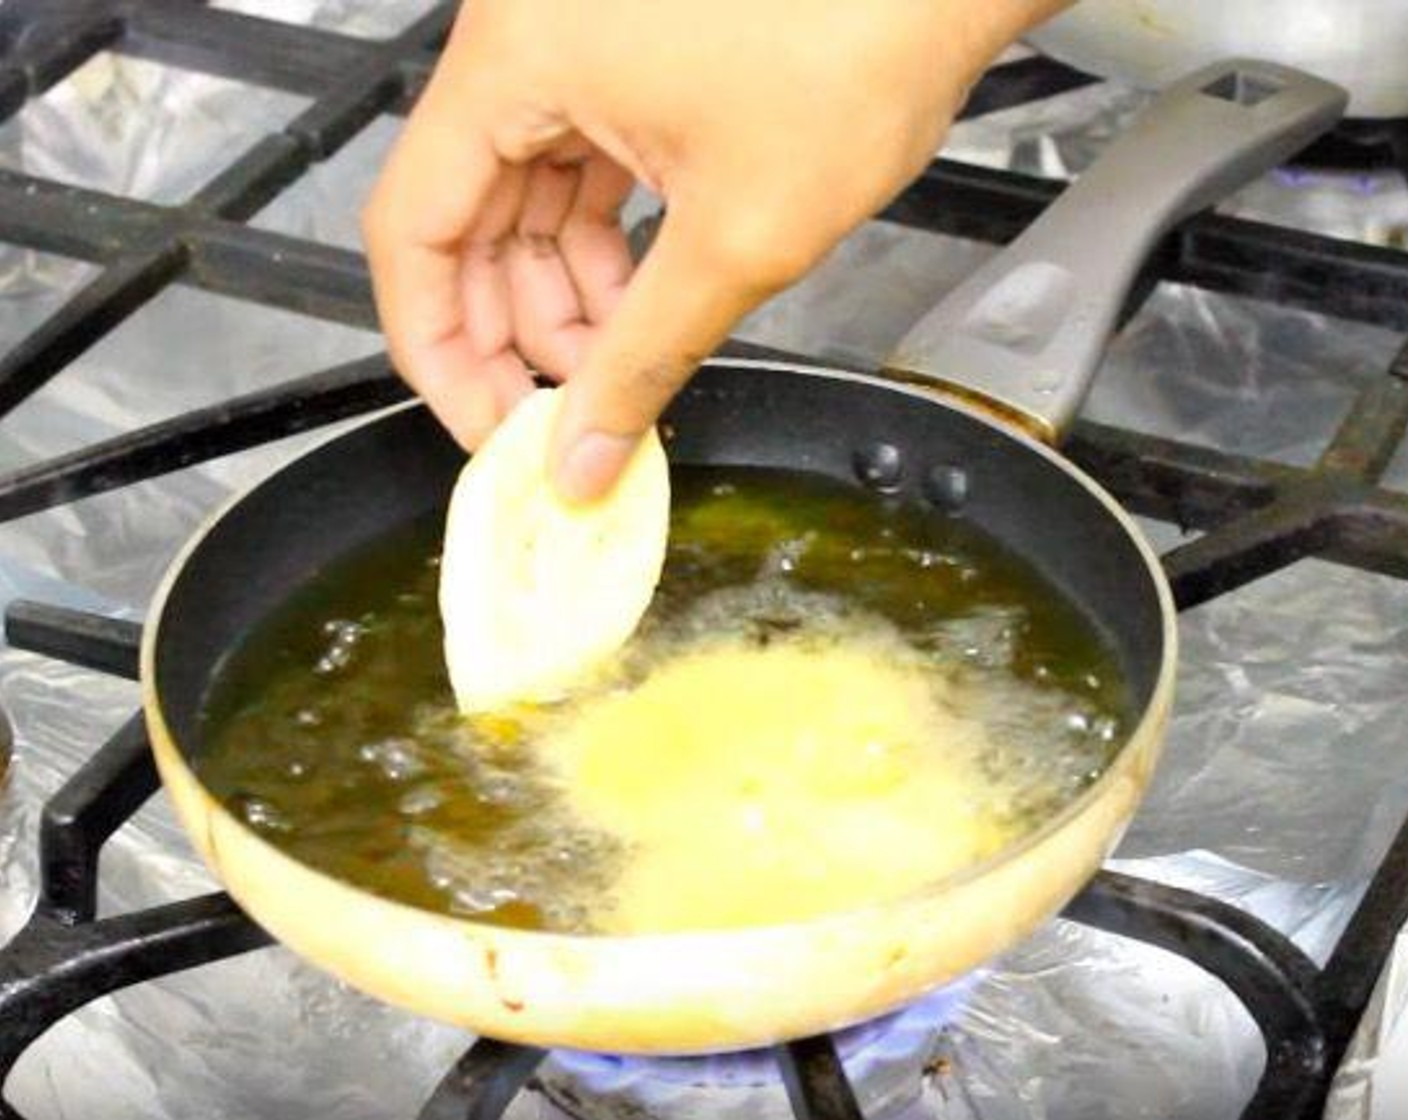 step 2 In a frying pan, warm Canola Oil (as needed) until it starts to bubble. Place plantains in the oil and cook for 30-45 seconds on each side, or until golden brown.